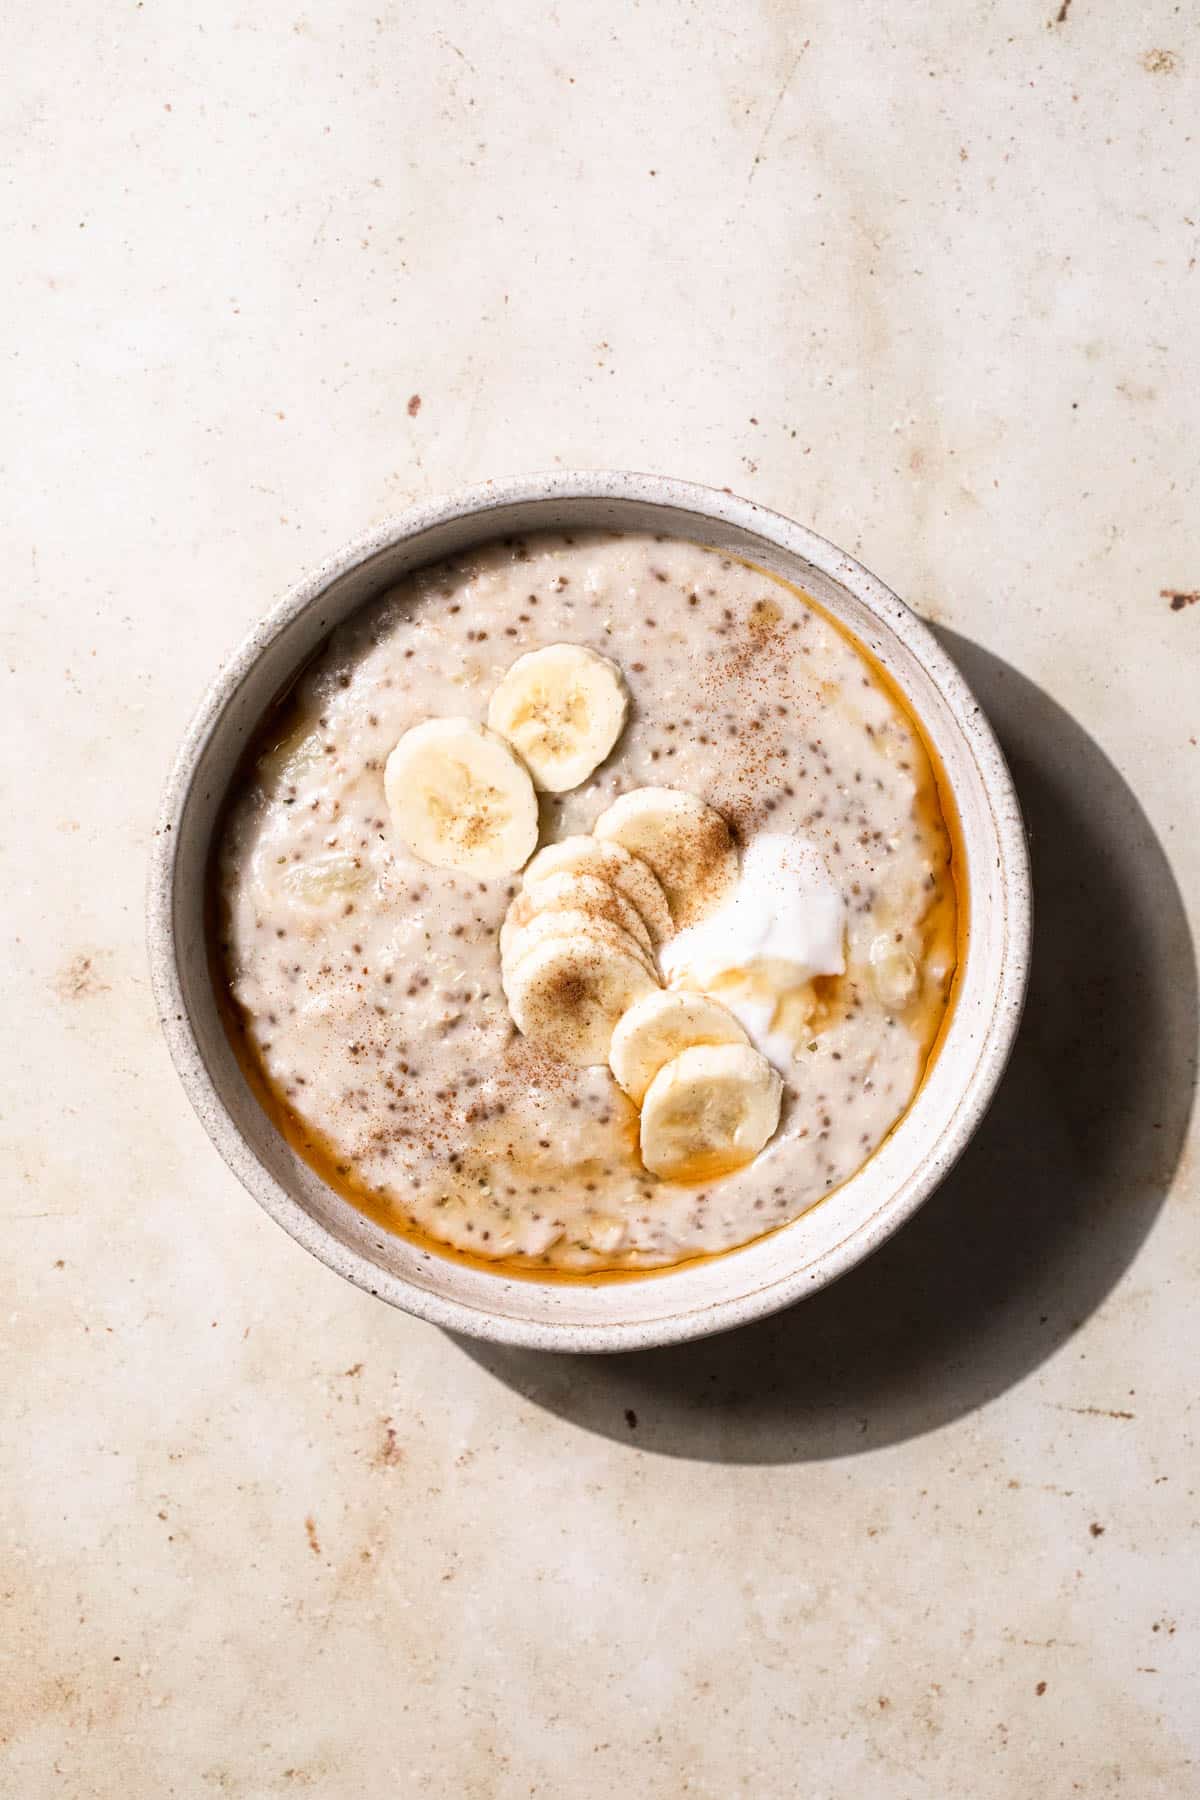 Porridge served with banana slices, coconut yoghurt, cinnamon and pure maple syrup.